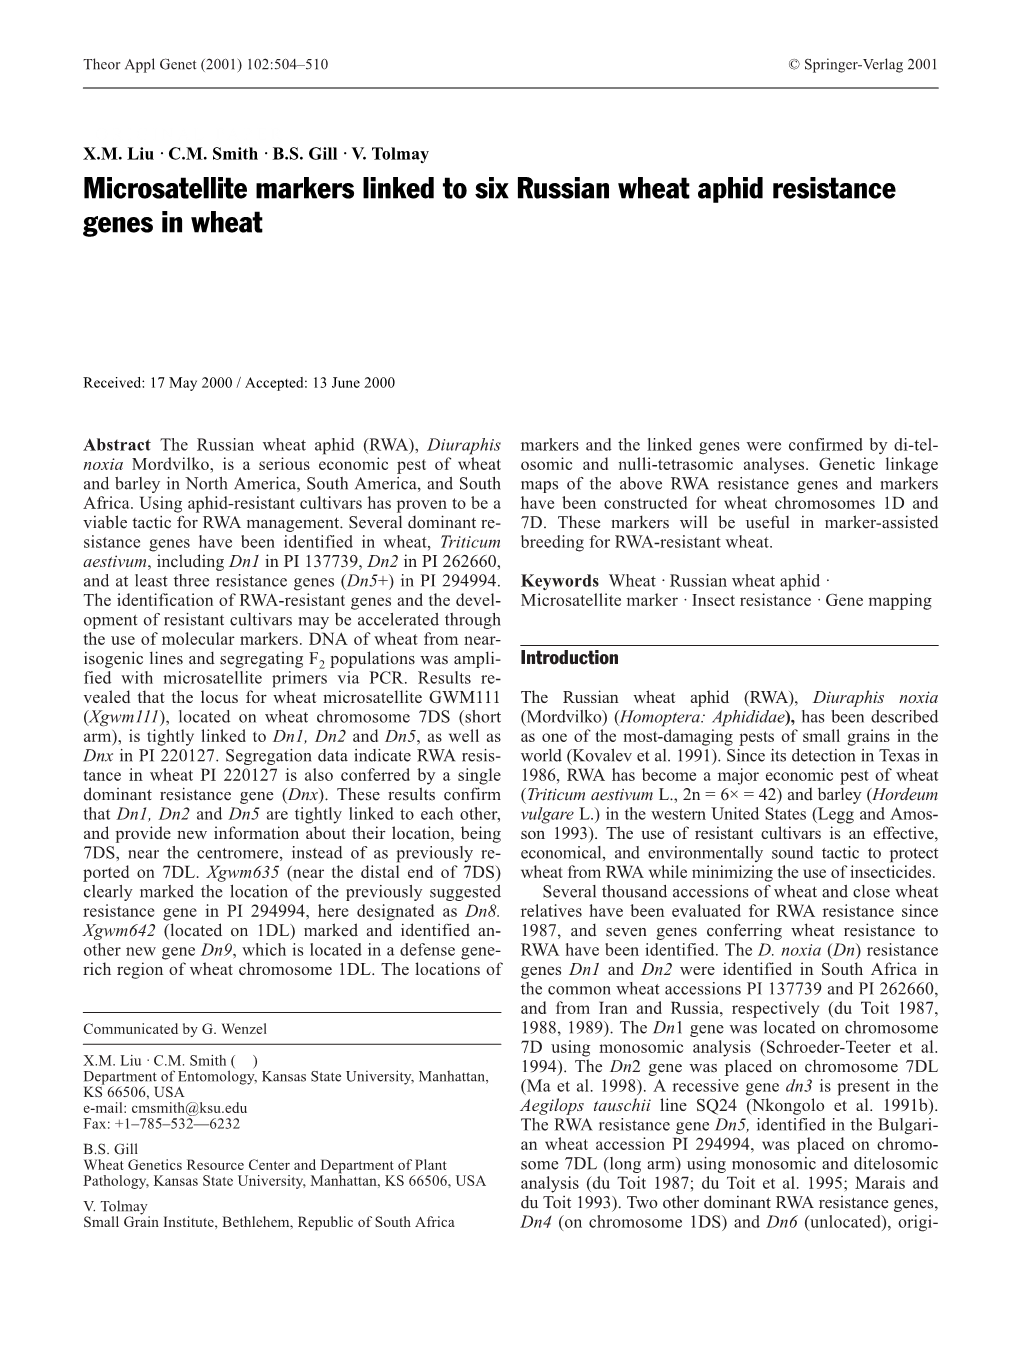 Microsatellite Markers Linked to Six Russian Wheat Aphid Resistance Genes in Wheat